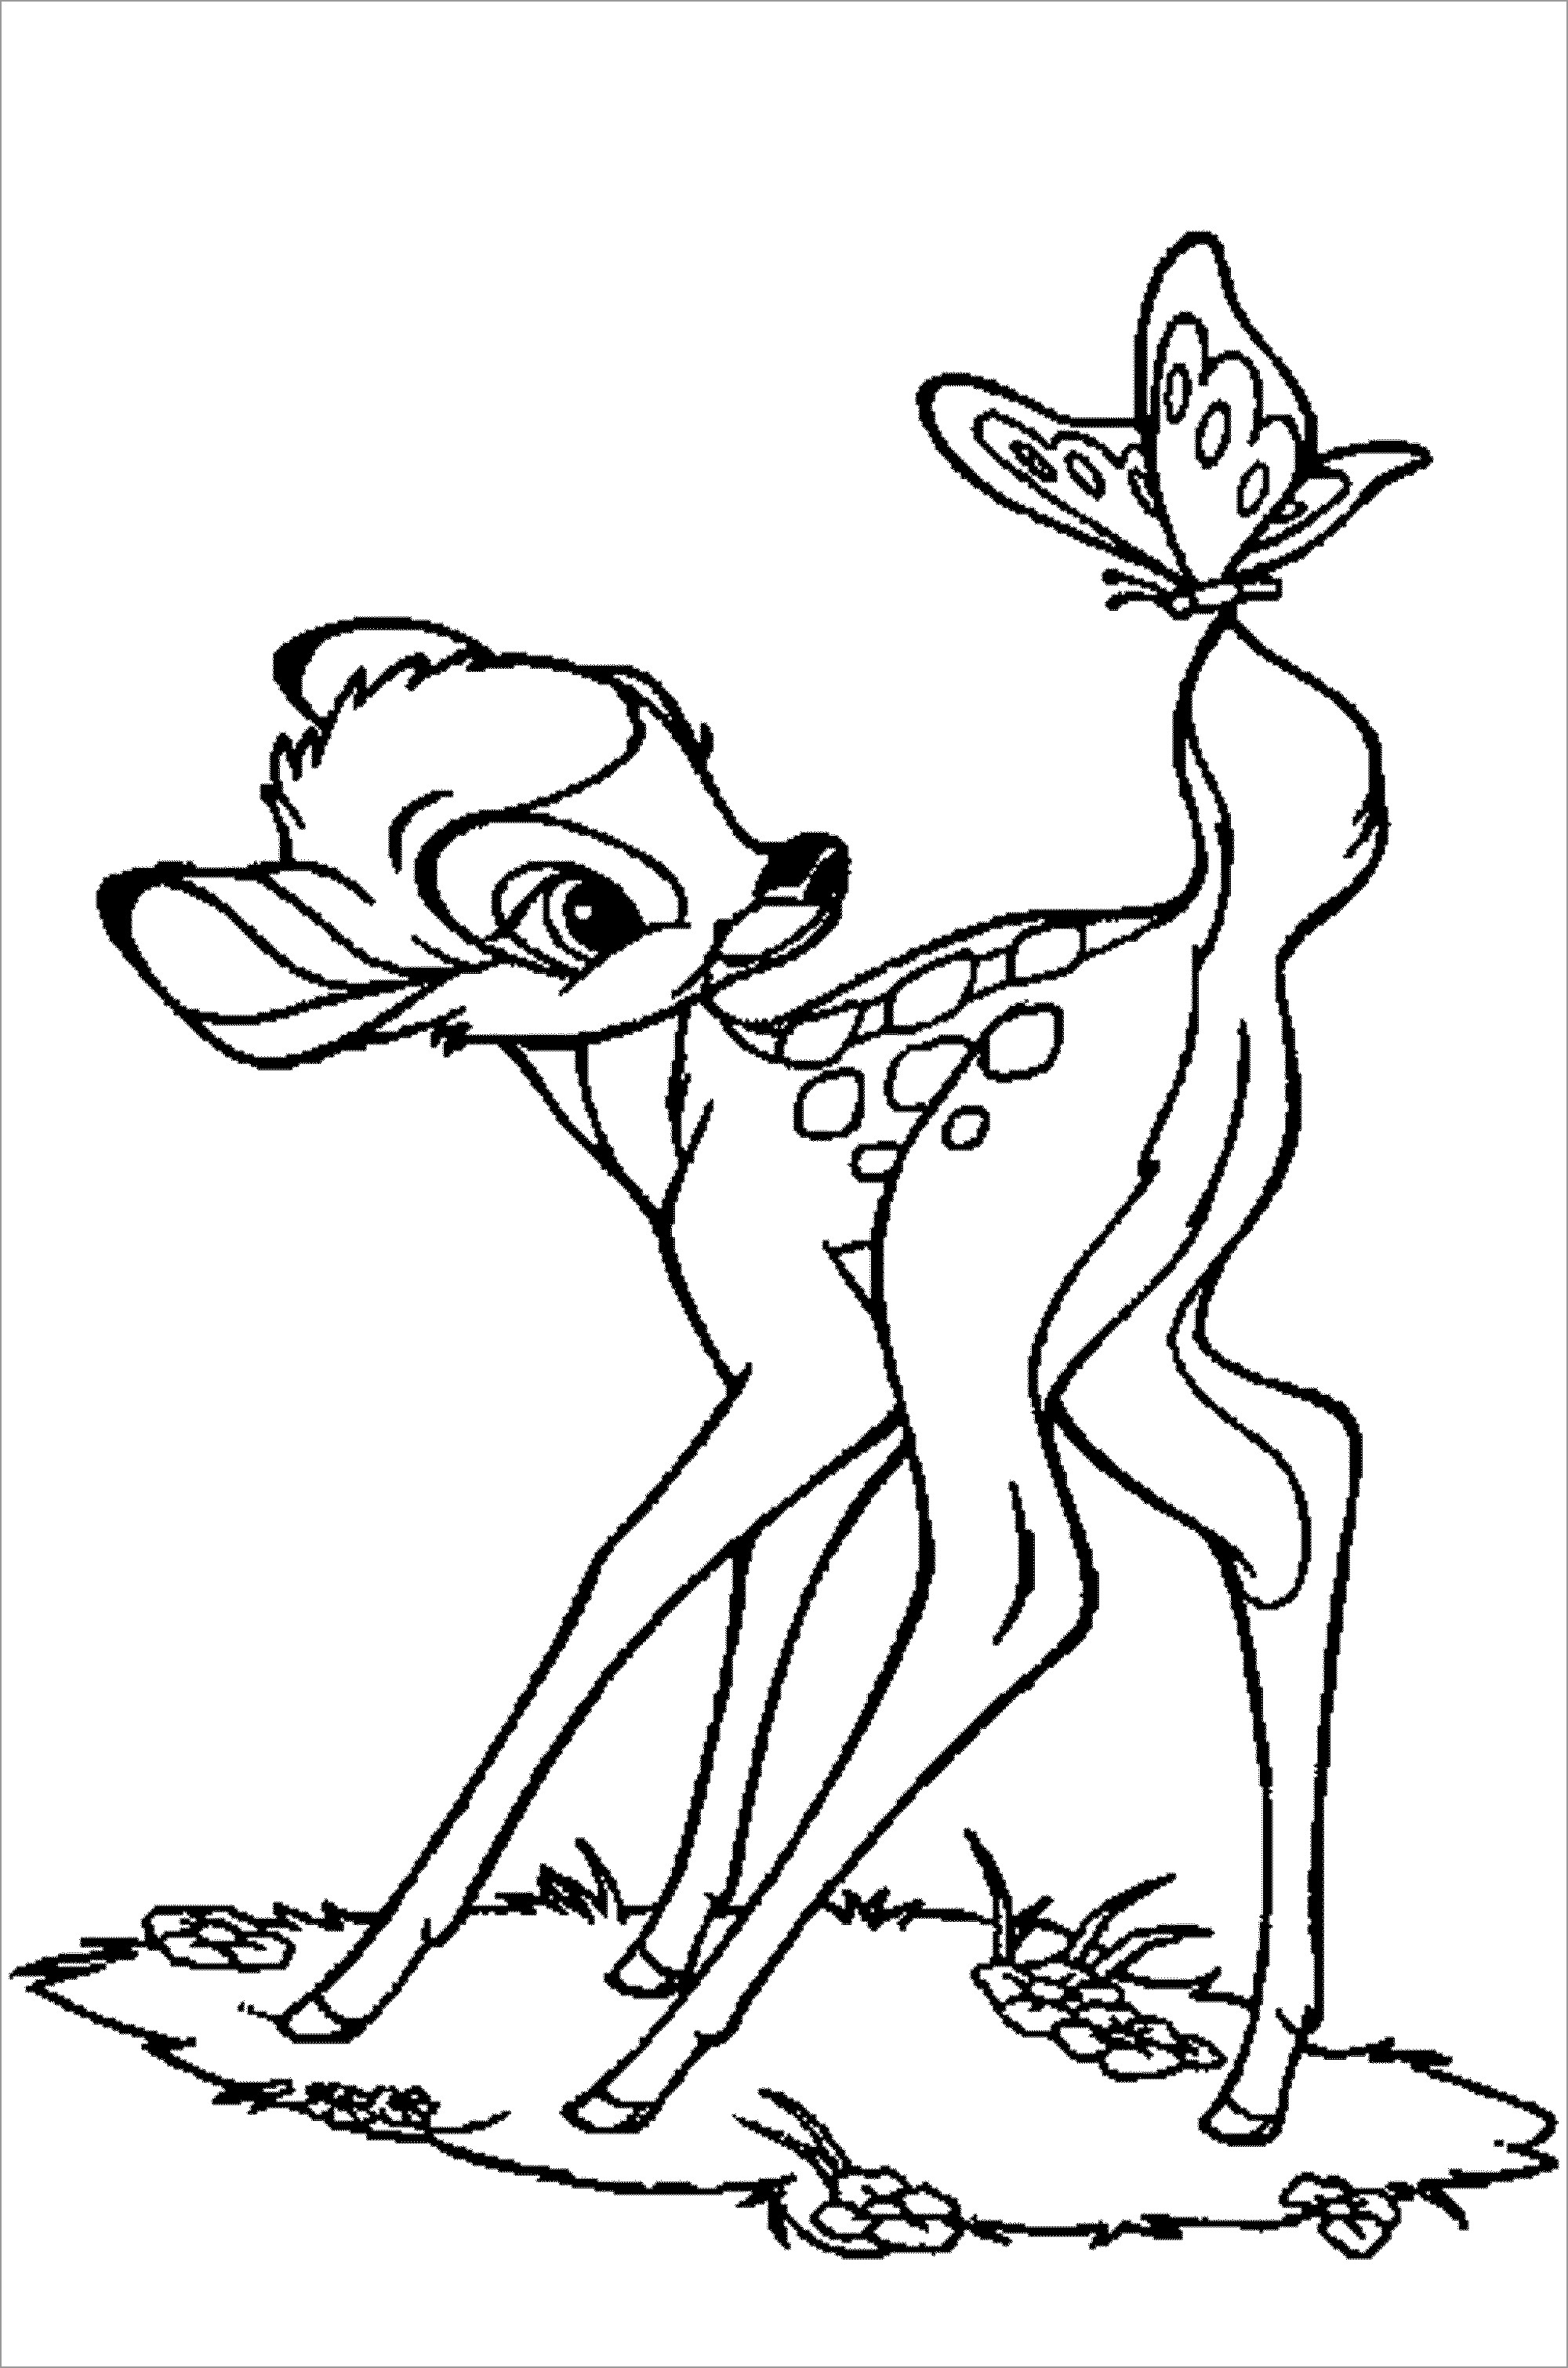 Baby Deer Coloring Page for Kids